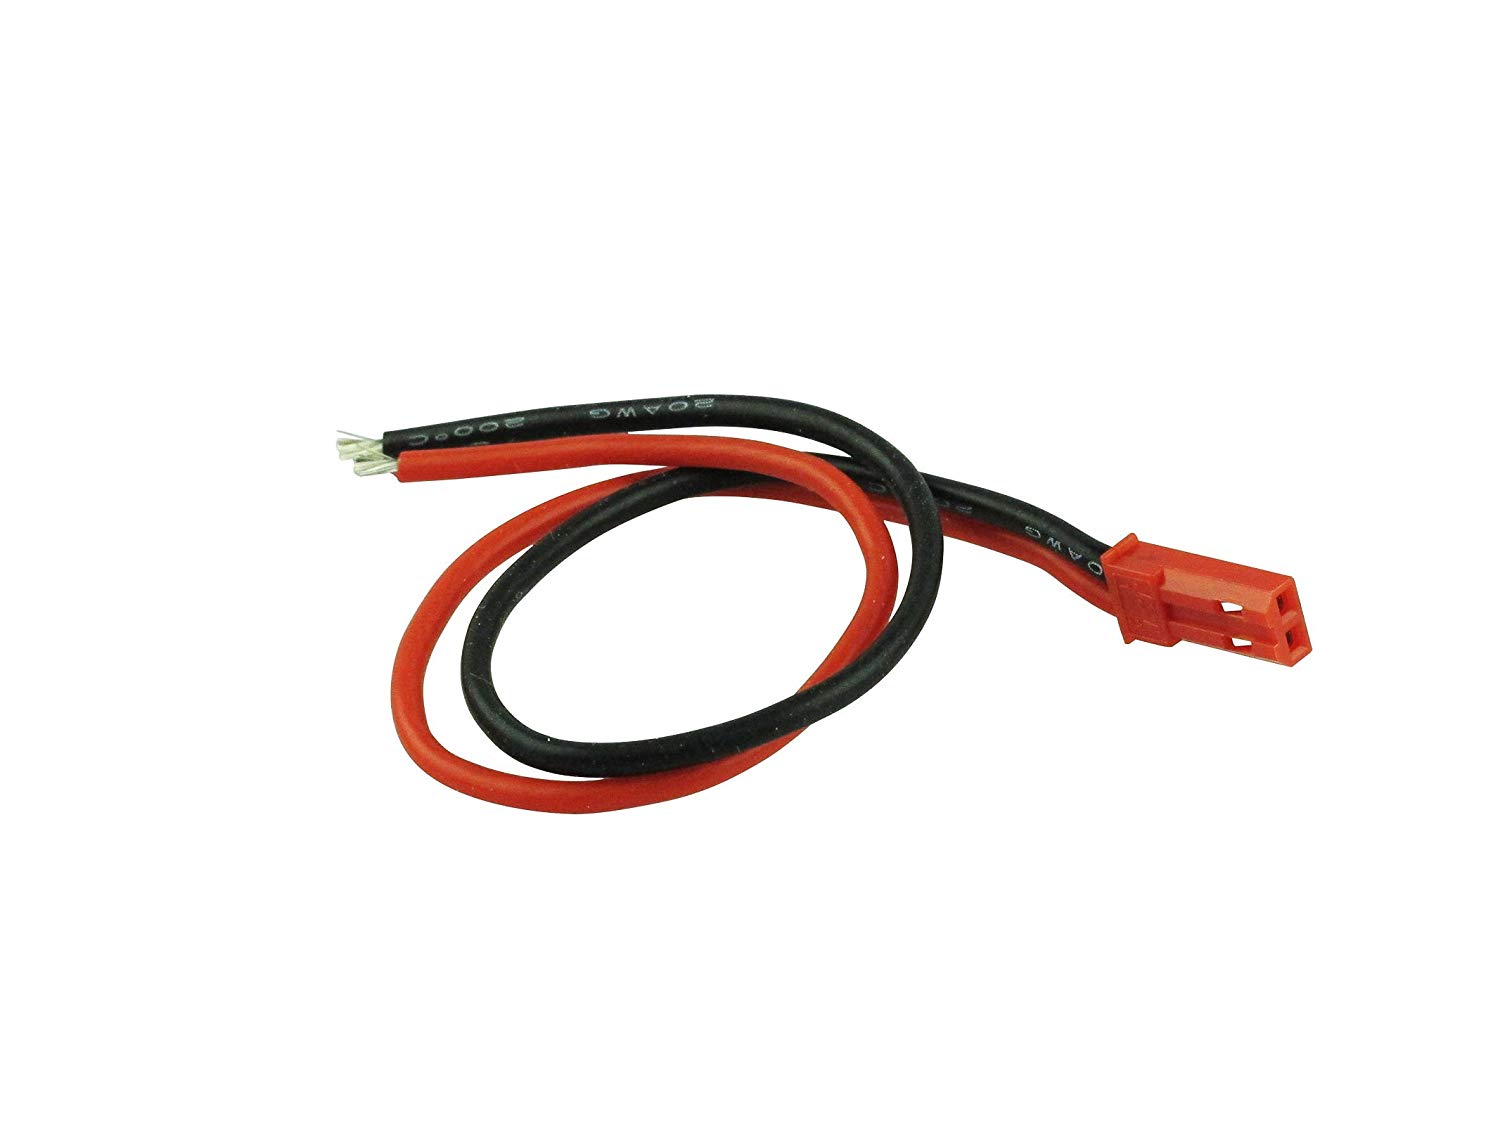 CONECTOR BEC-JST MACHO C/ CABLE